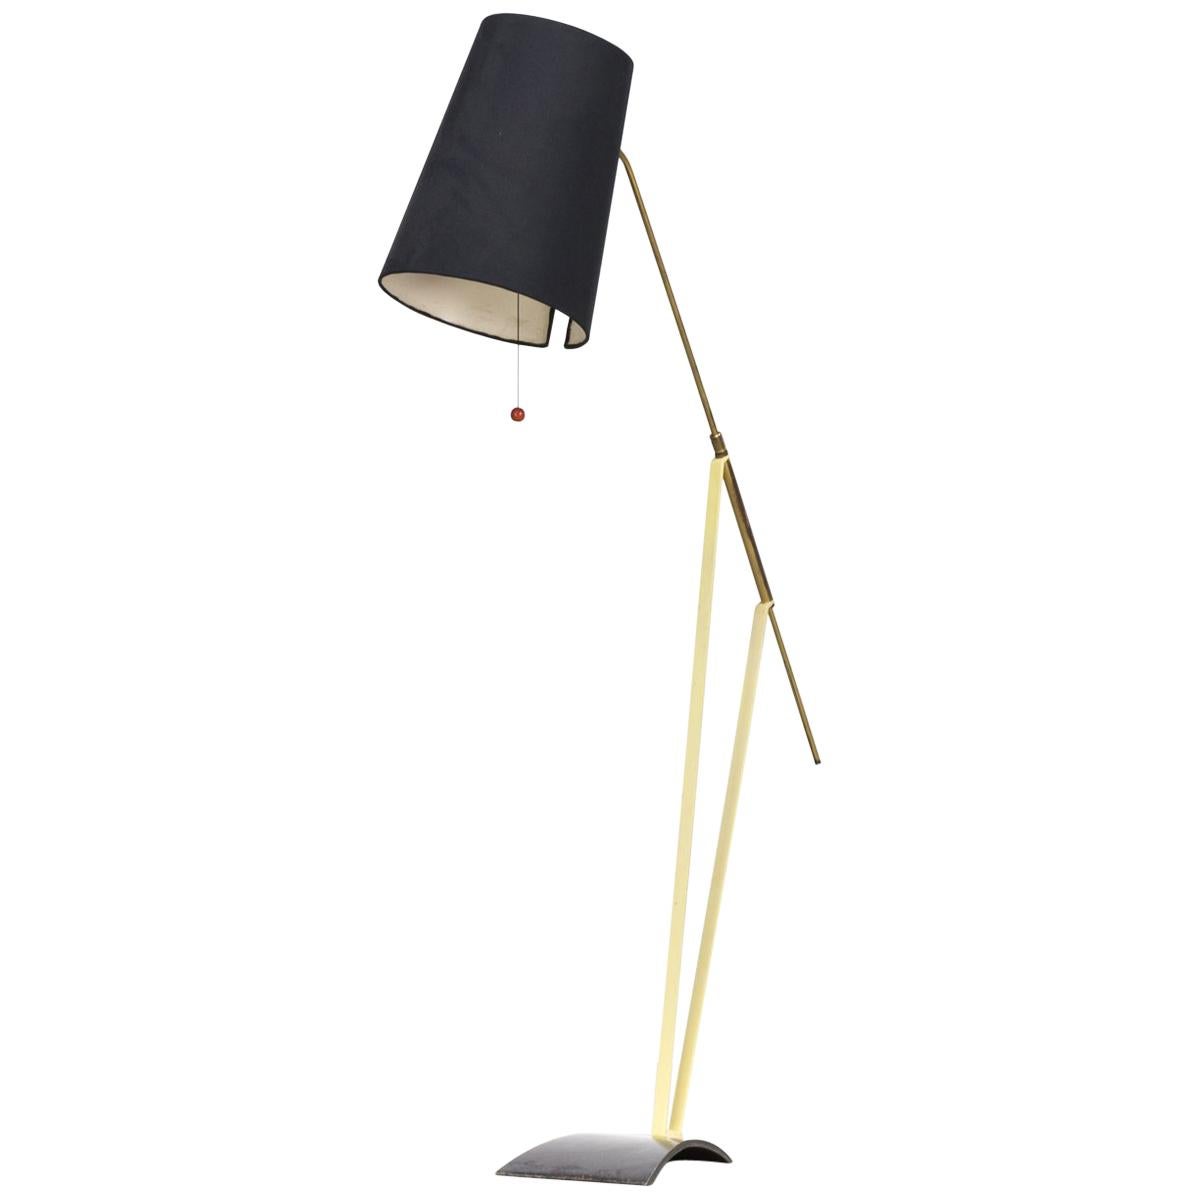 1950s Hans Bergström Floor Lamp with Adjustable Fabric Shade for Ateljé Lyktan For Sale